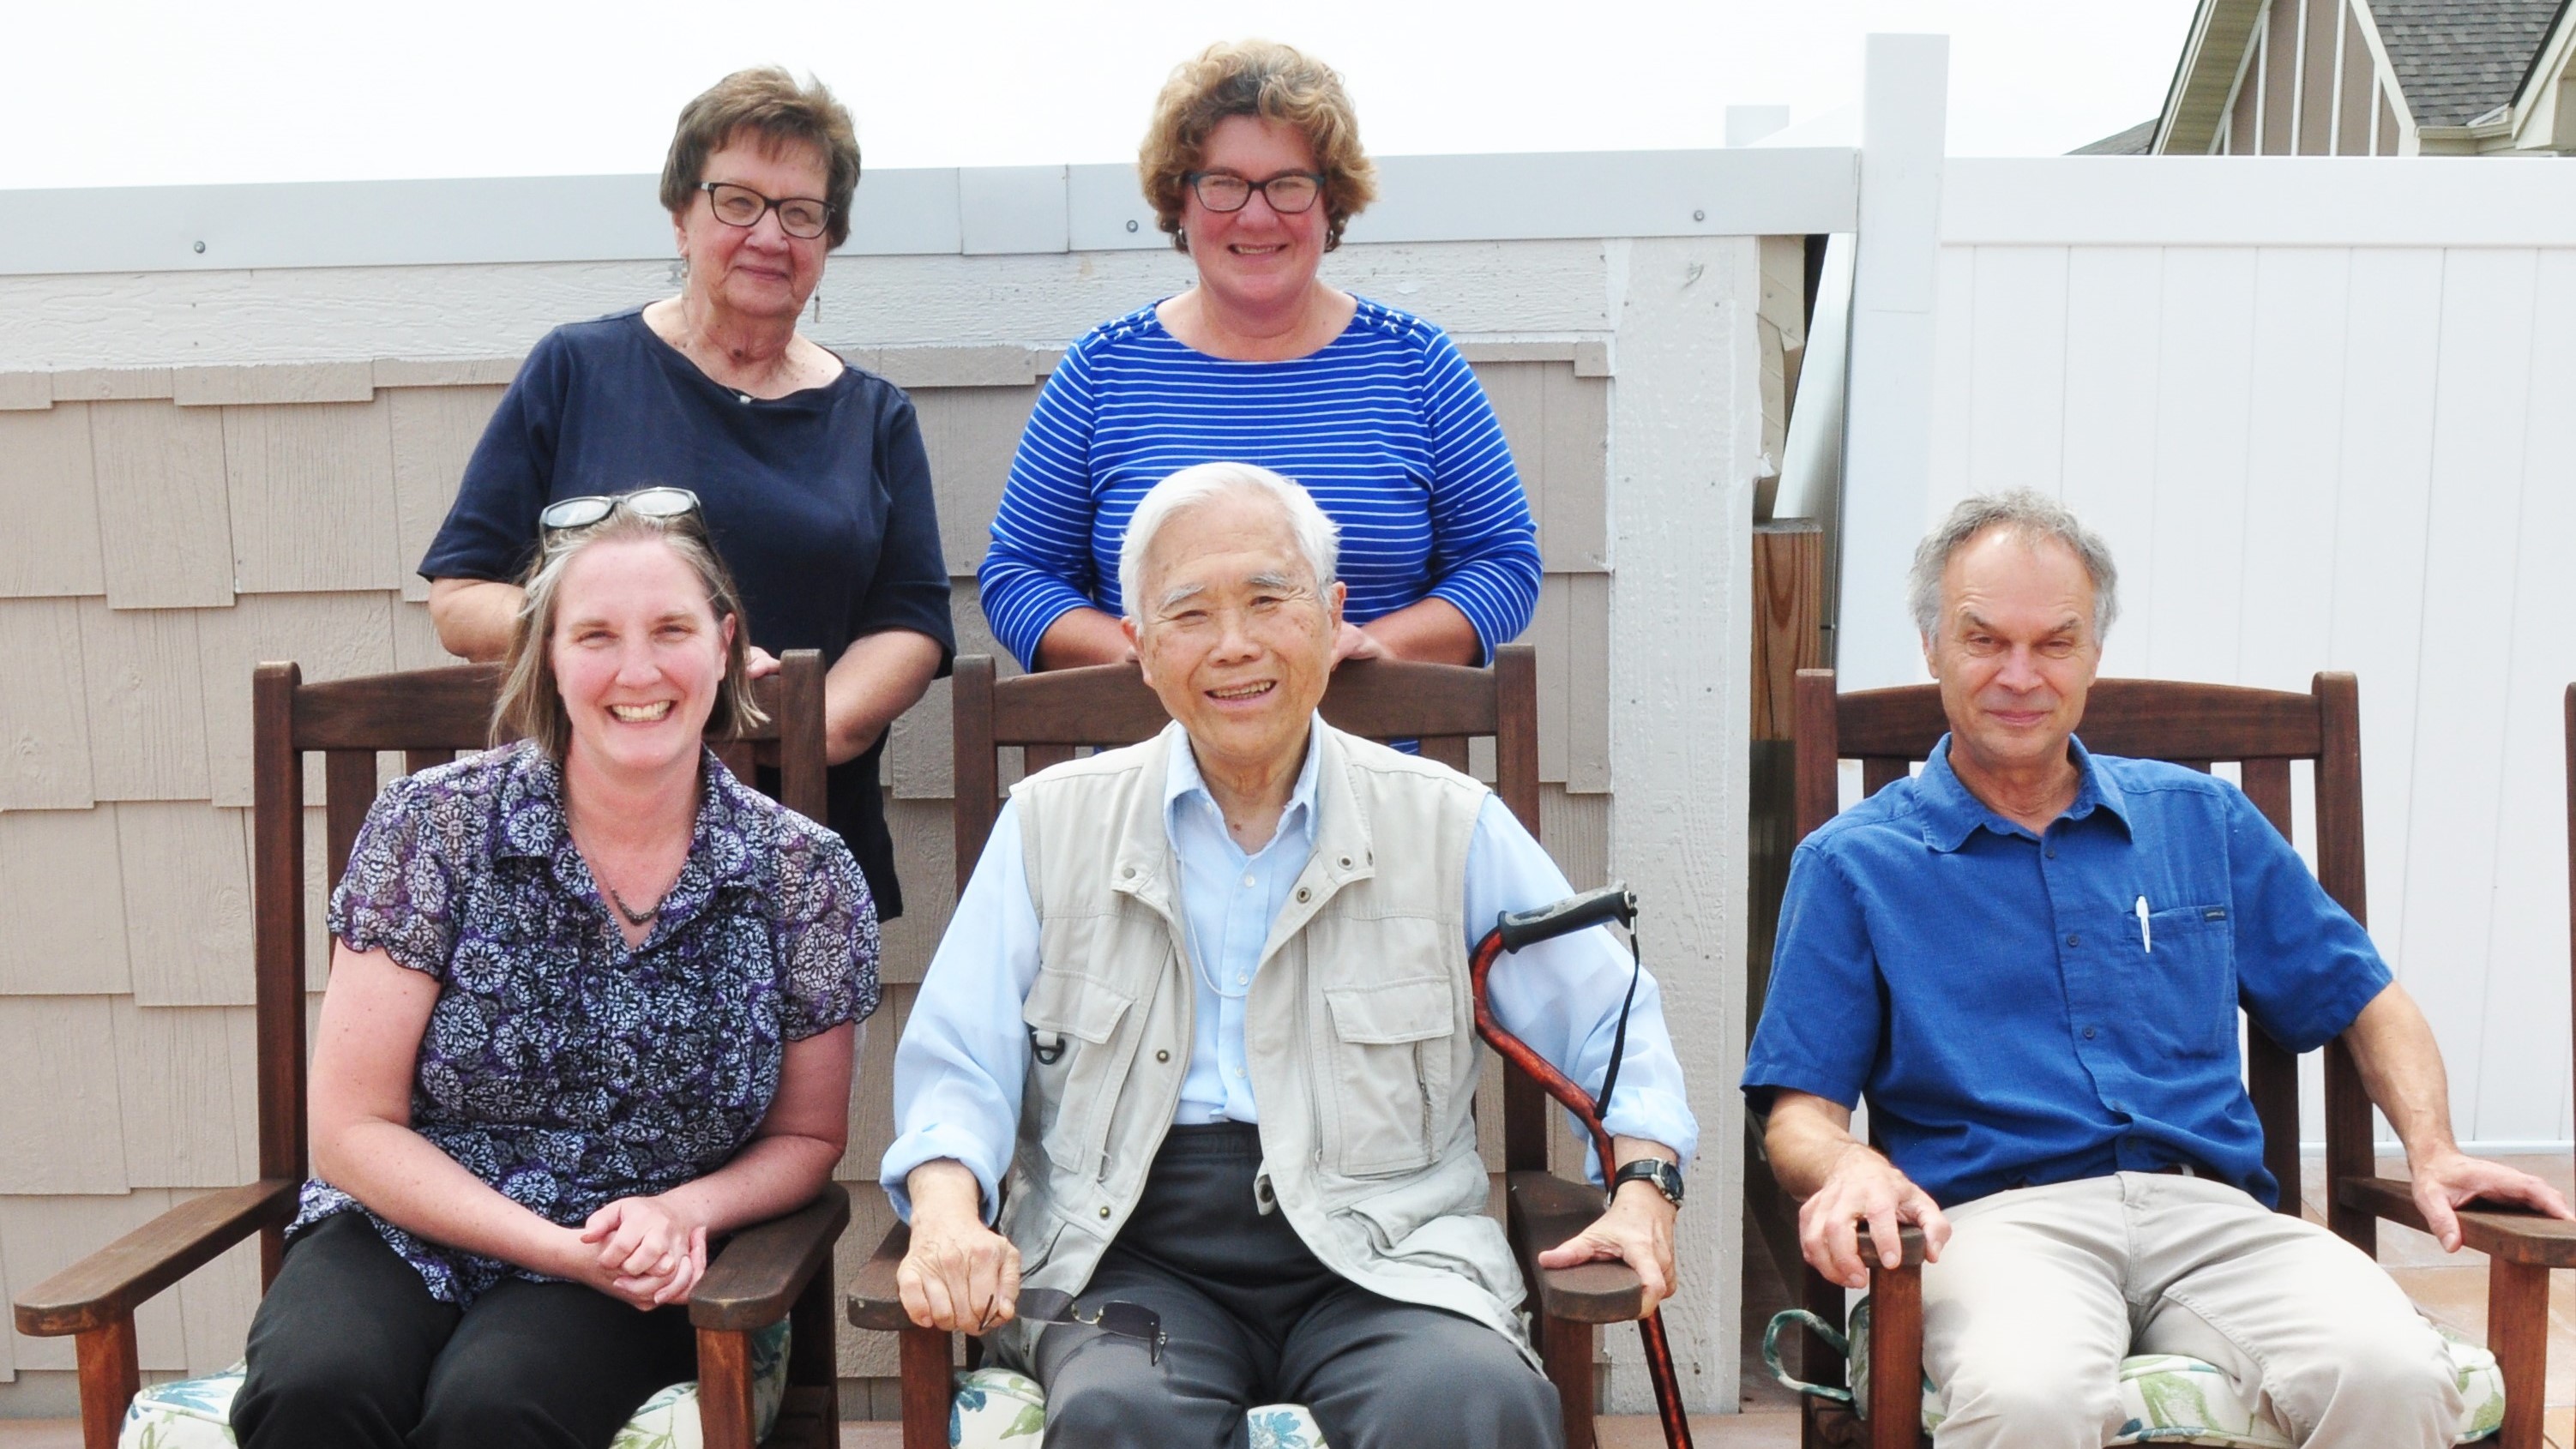 A photo of HH Cheng sitting in a rocking chair surrounded by friends and colleagues from the Department of Soil, Water, and Climate 